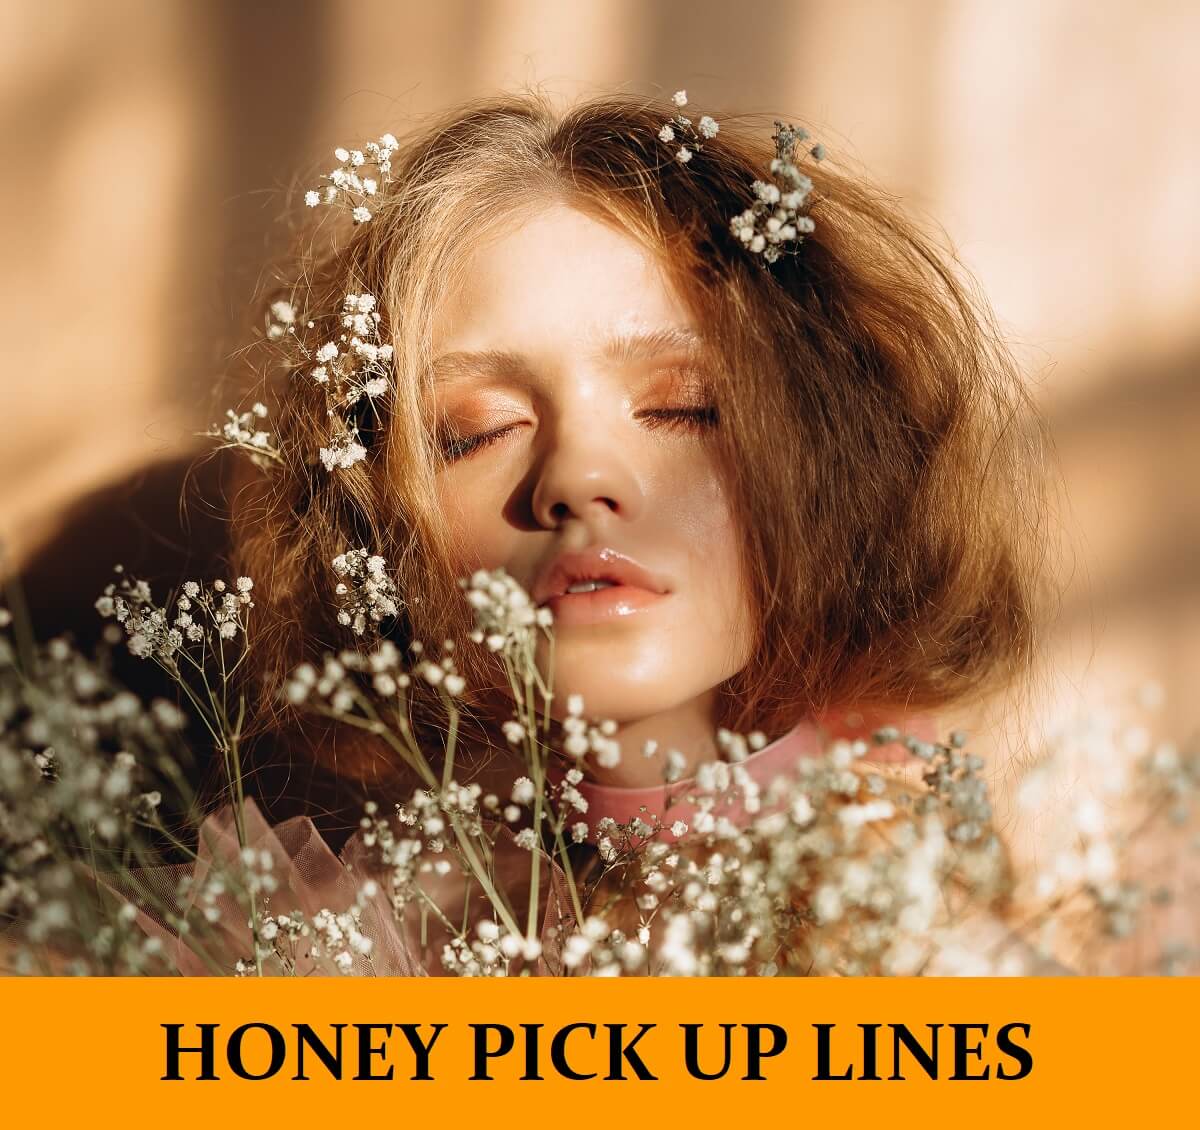 Pick Up Lines About Honey